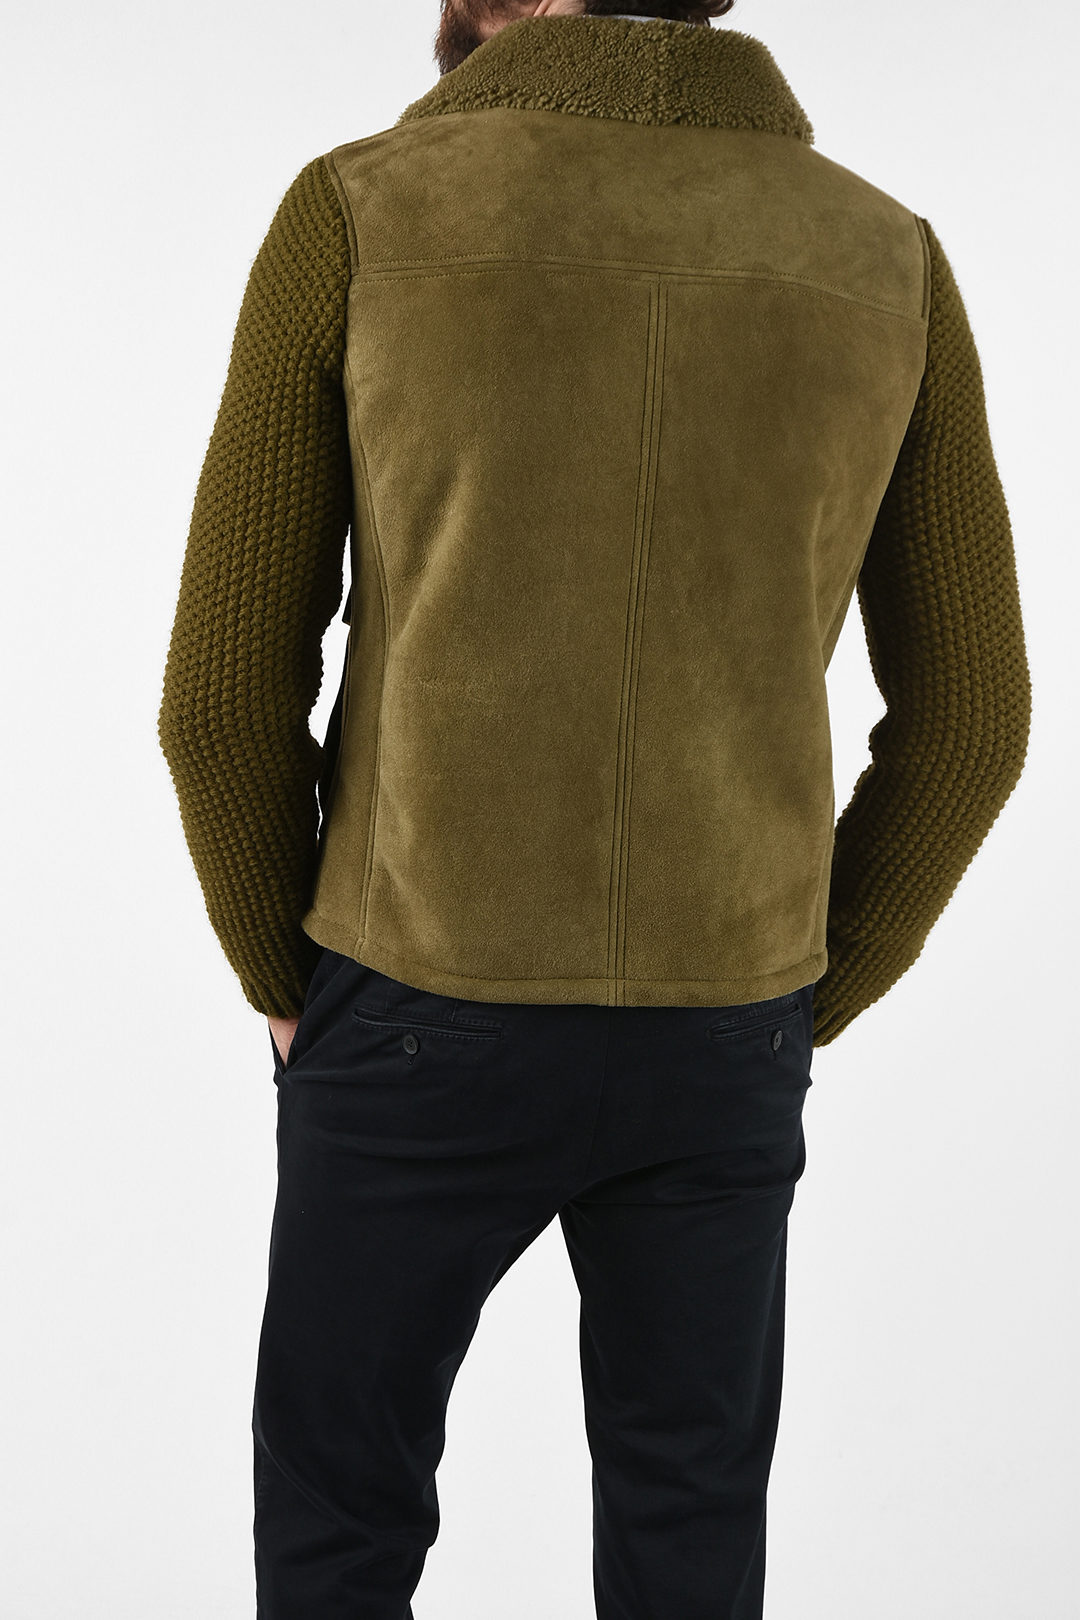 Corneliani CC COLLECTION Suede Leather MERINO jacket with Knit Sleeve ...